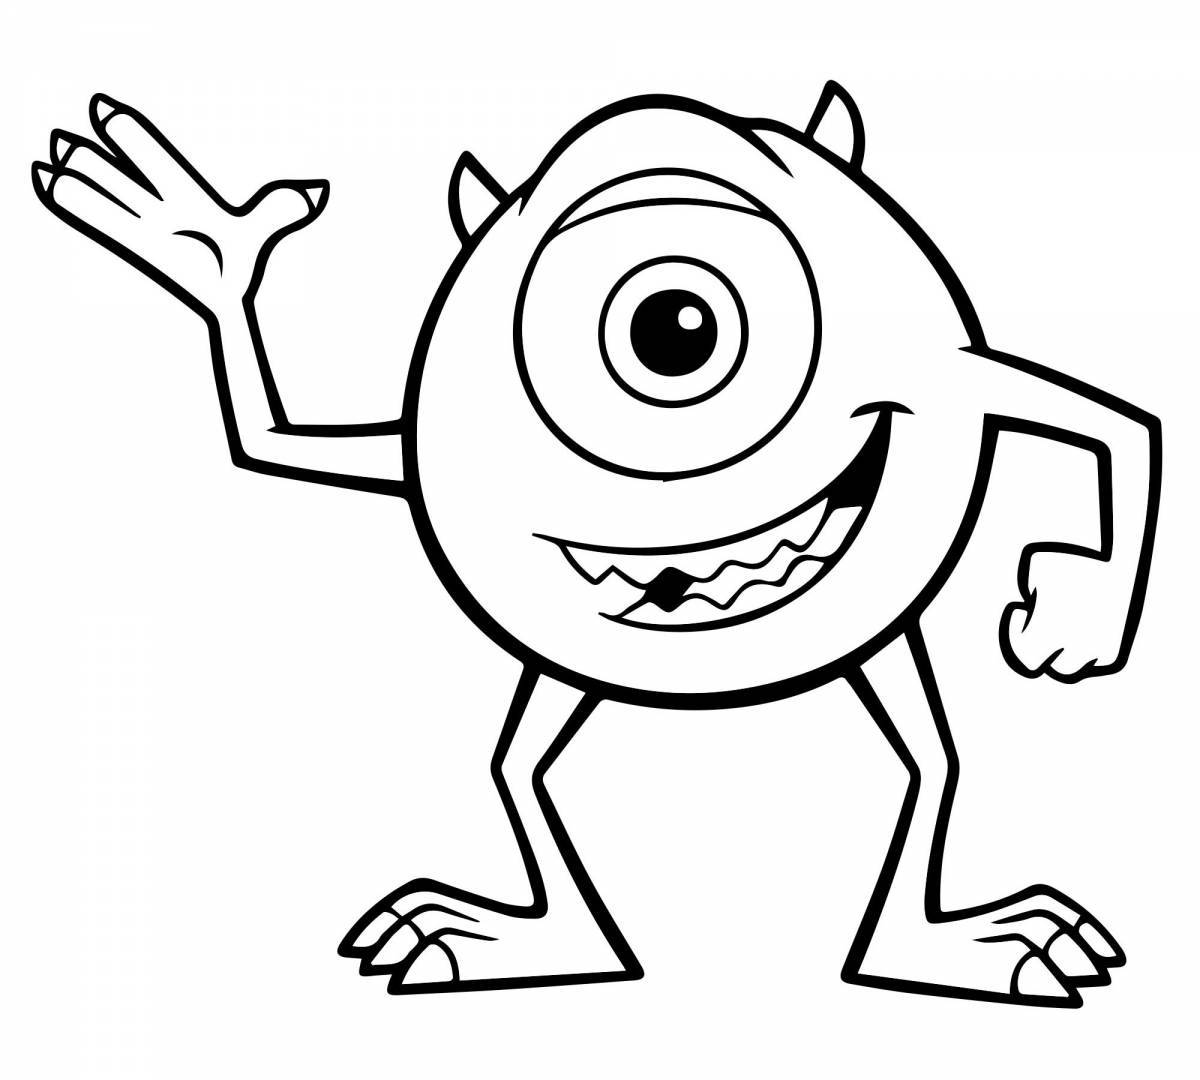 Grotesque monster coloring pages